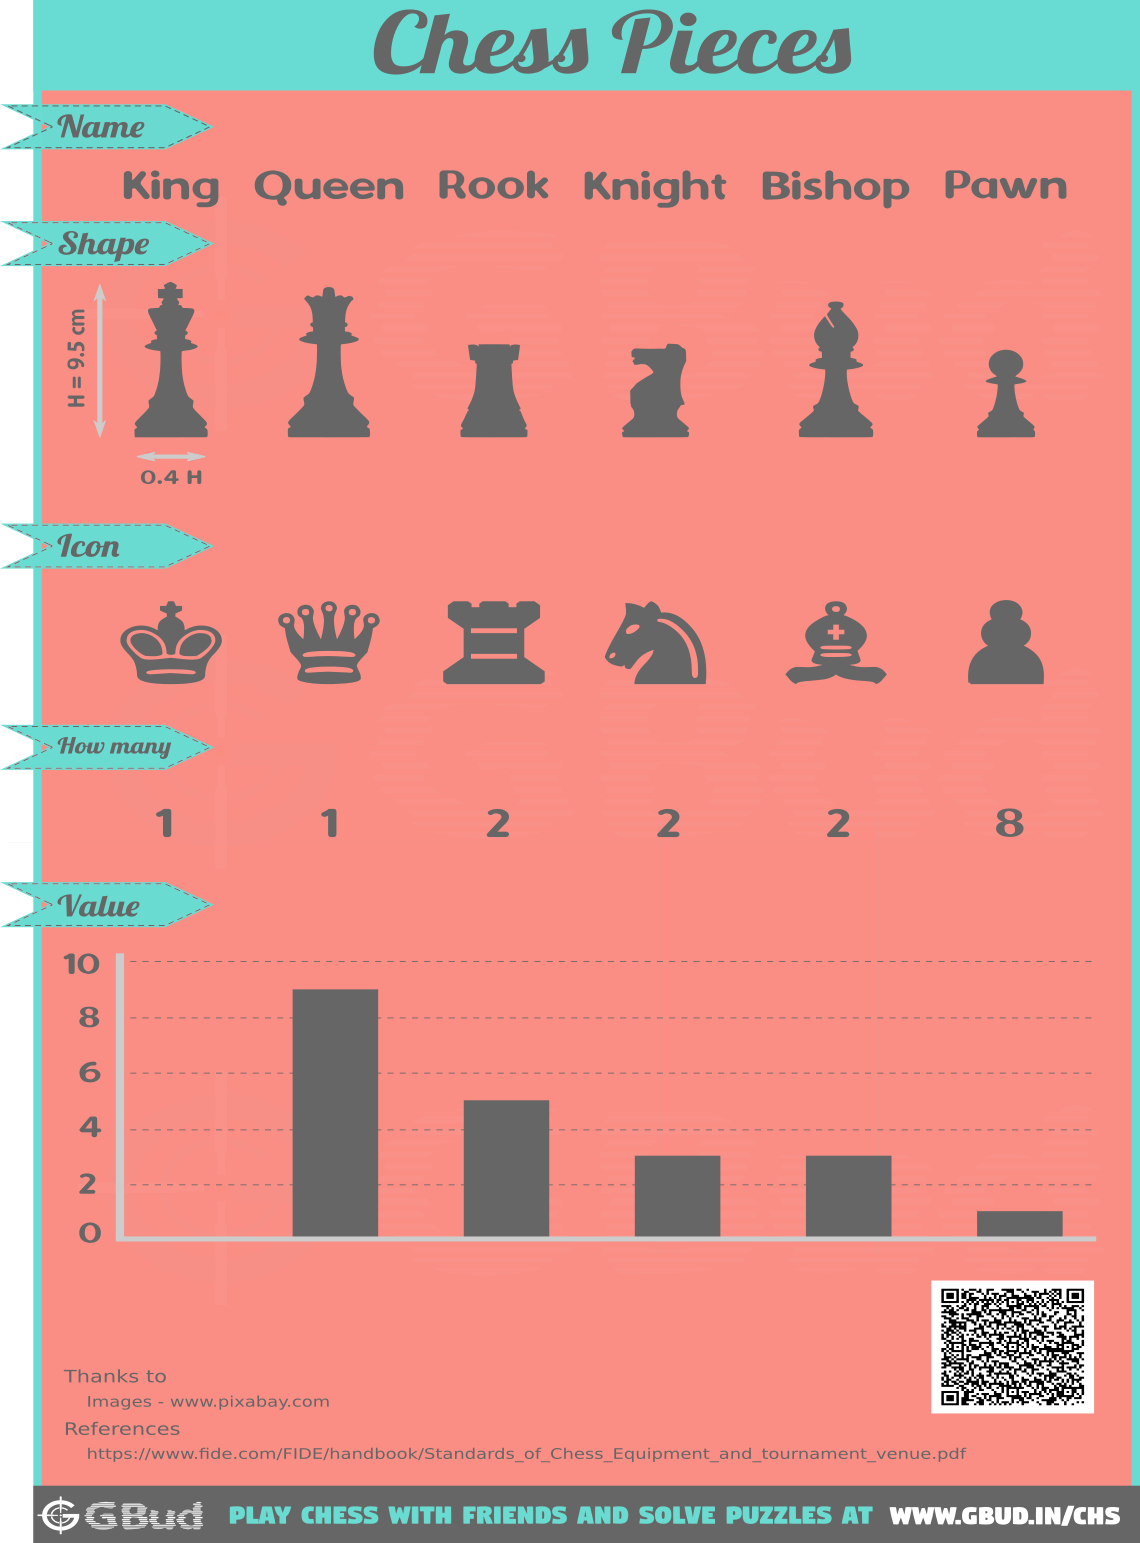 name of all chess pieces